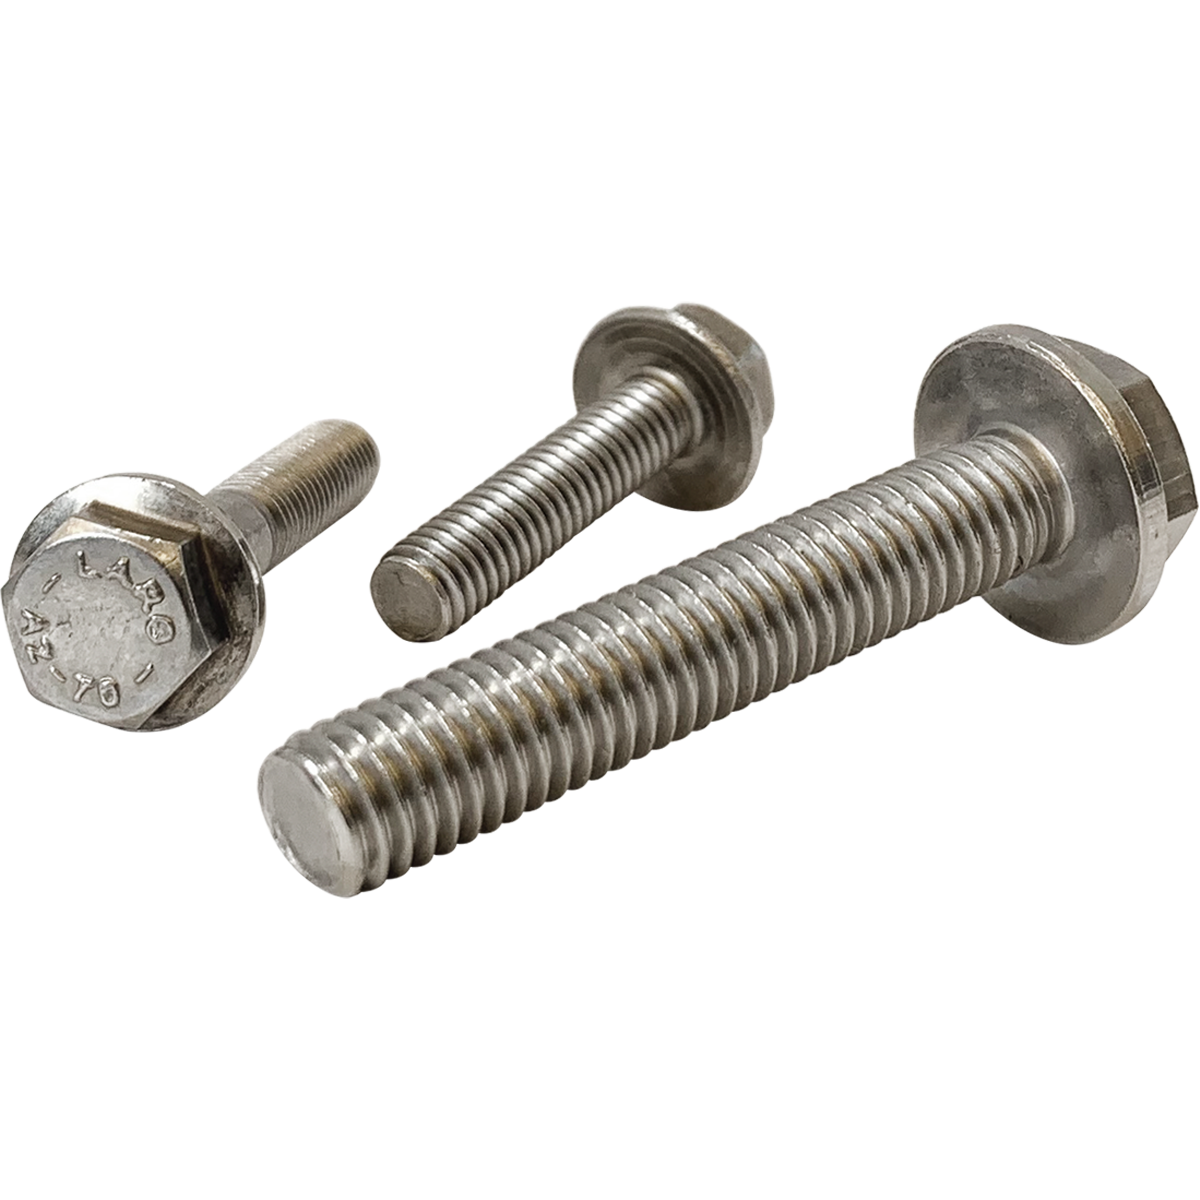 Flanged hex bolts available in corrosion resistant A2 stainless steel. Available in various sizes all at great prices